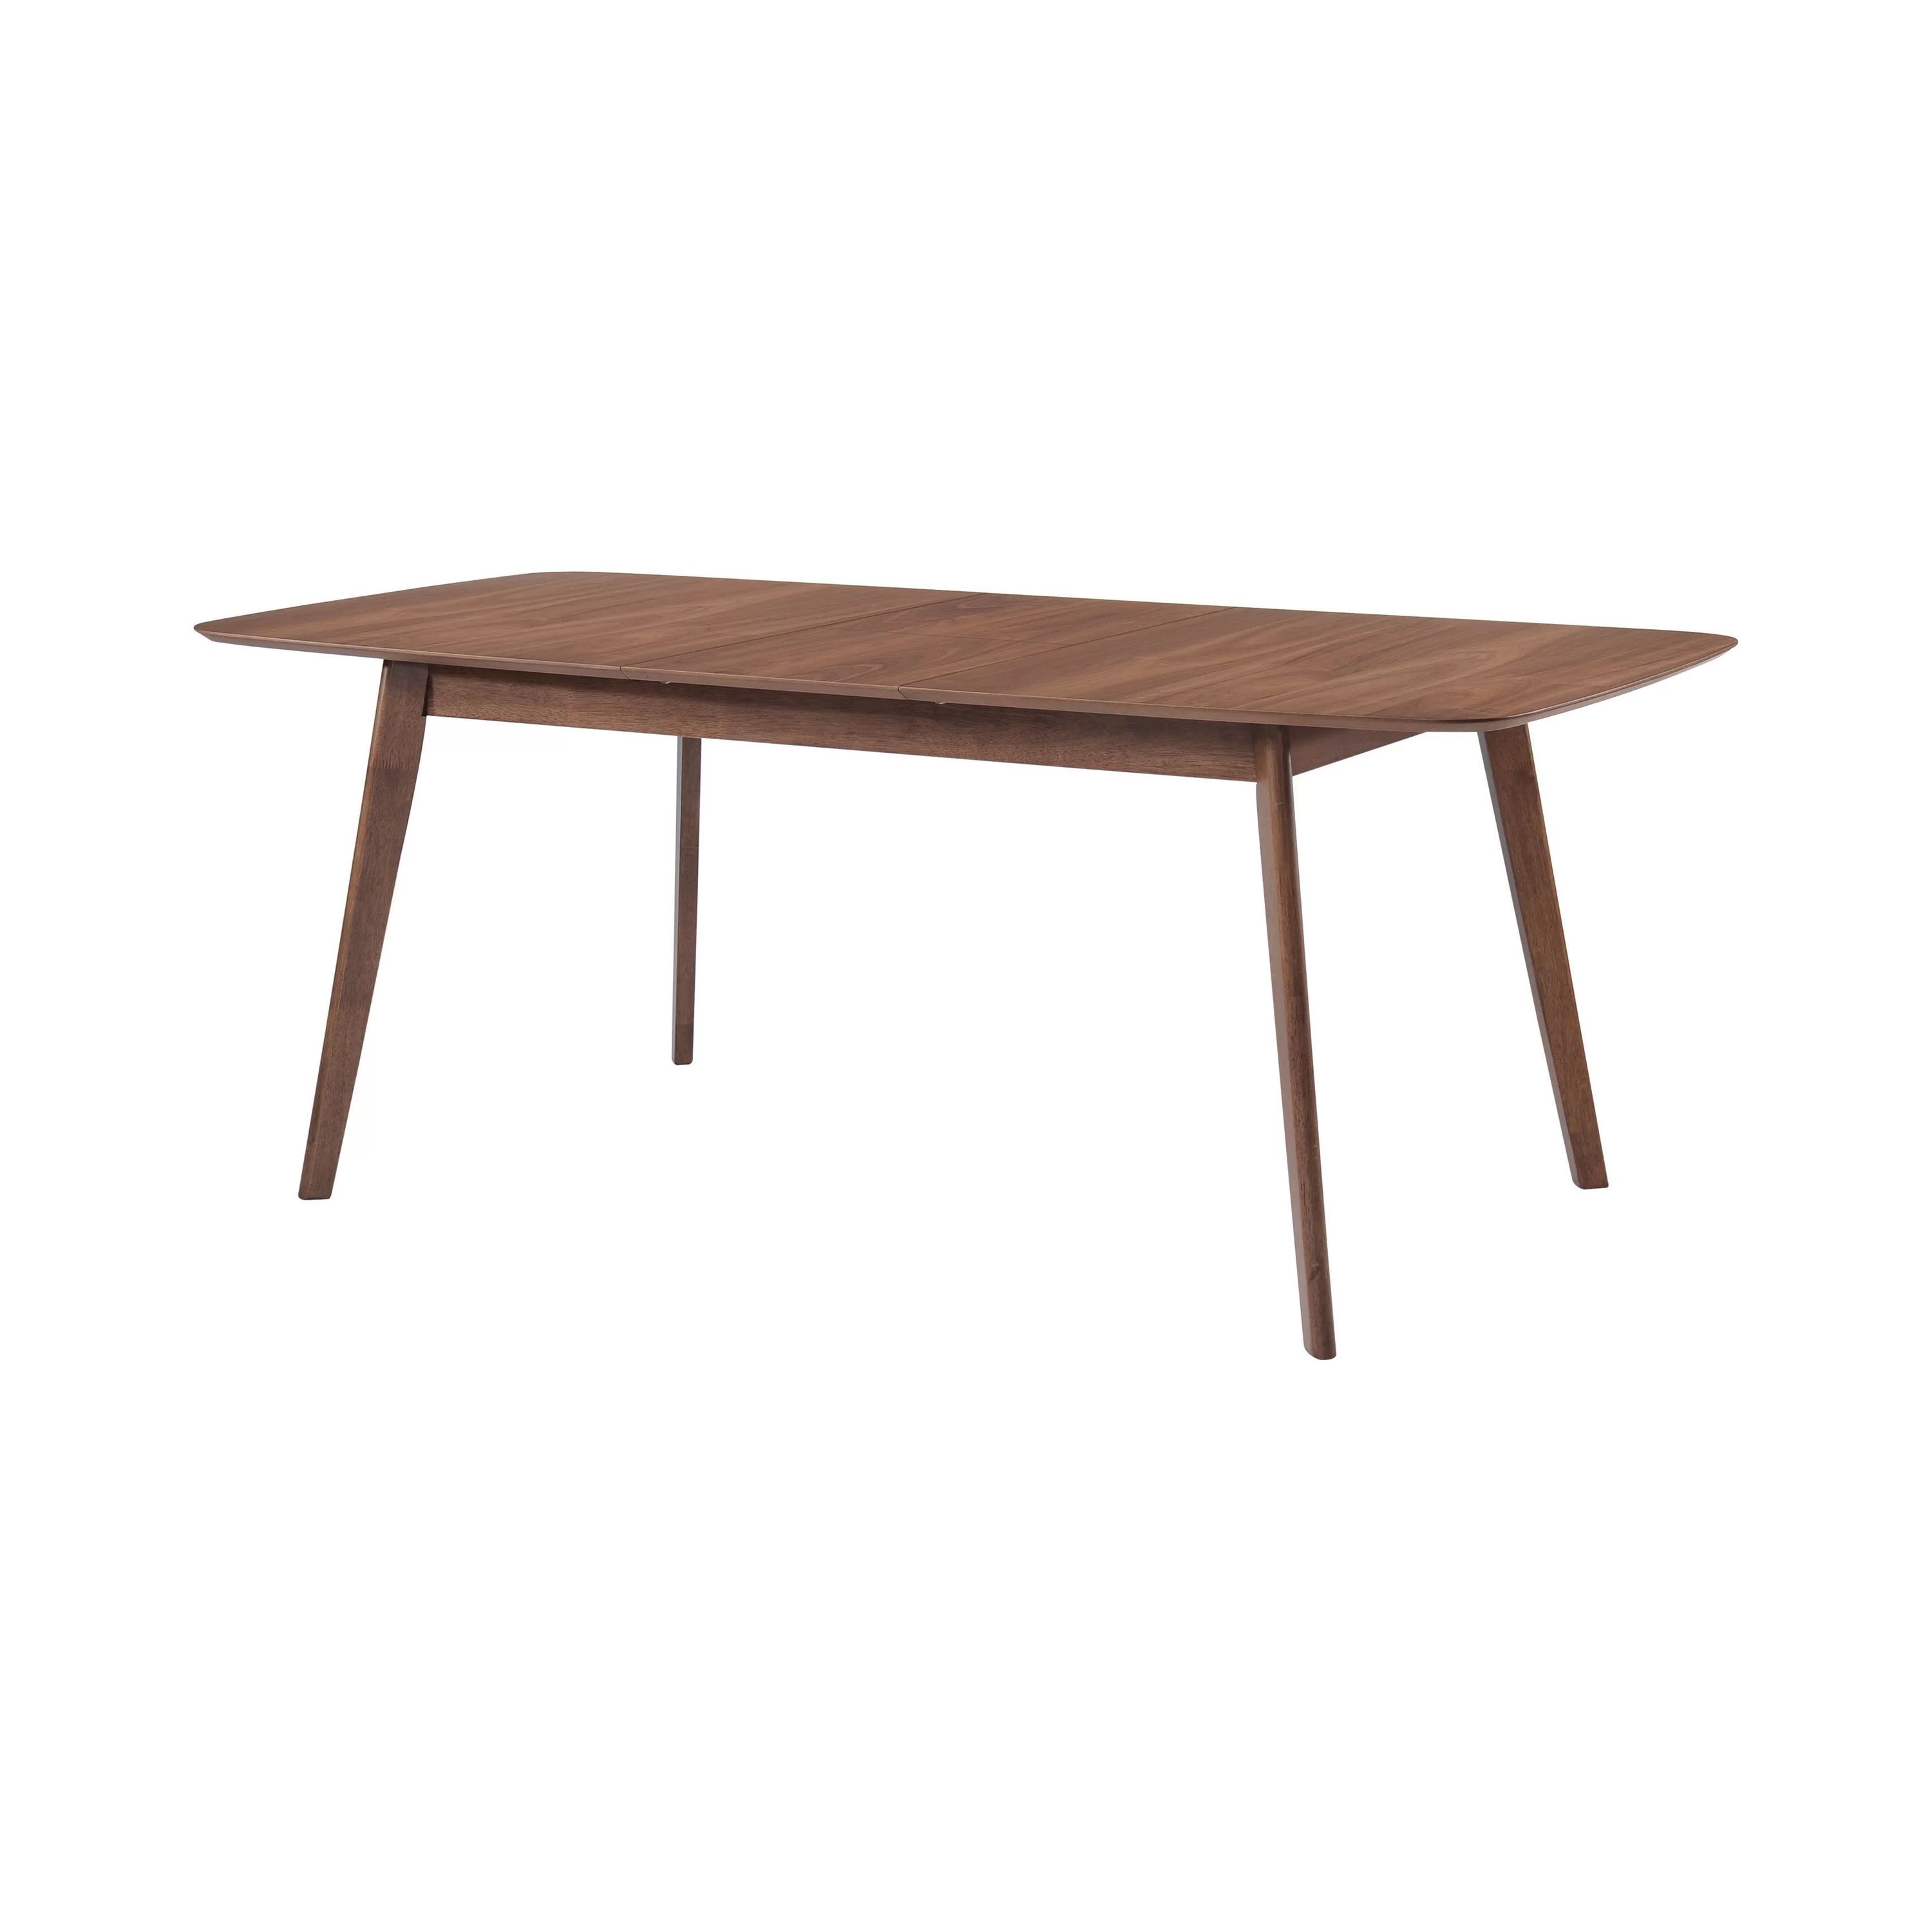 Stahl Butterfly Leaf Dining Table | Wayfair North America